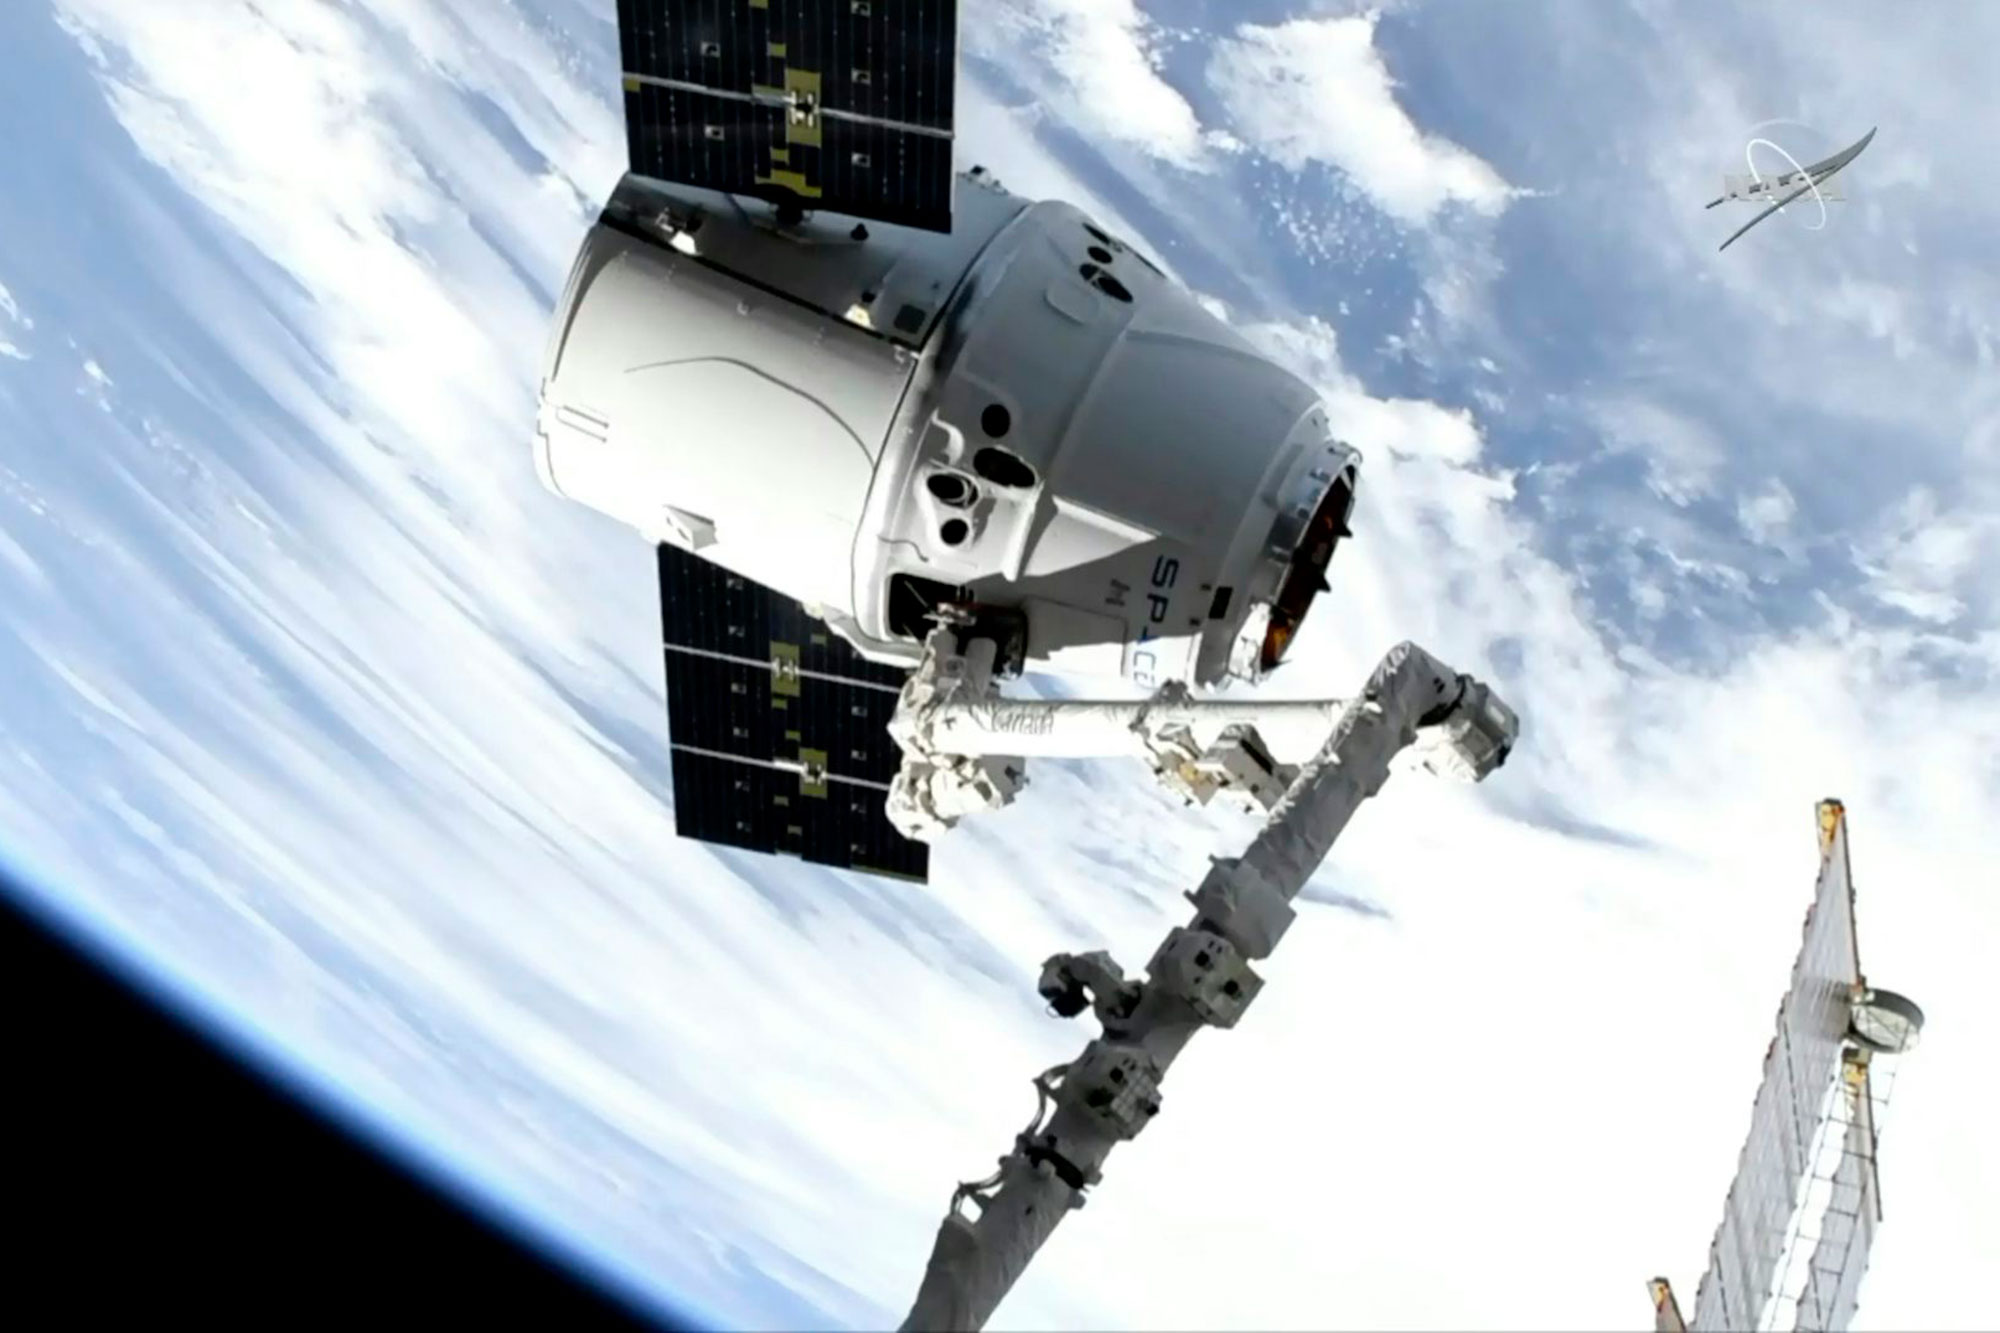 A conical white spacecraft with two rectangular solar panels in space, with the Earth in the background